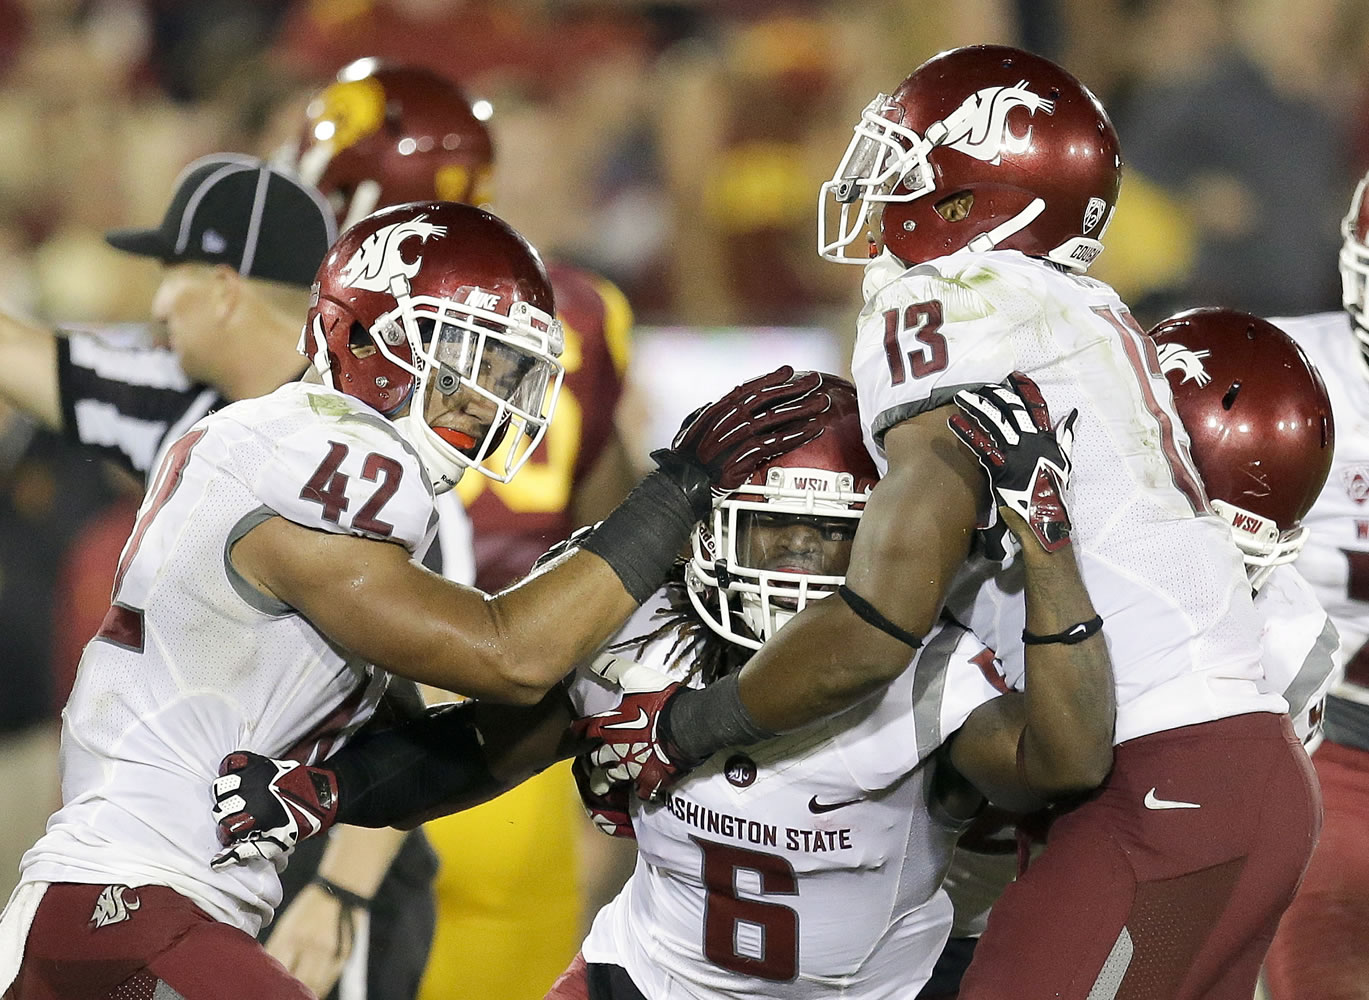 Washington State cornerback Damante Horton, middle, celebrates his interception with teammates Cyrus Coen, left, and Darryl Monroe during the second half of an NCAA college football game against Southern California in Los Angeles, Saturday, Sept. 7, 2013.